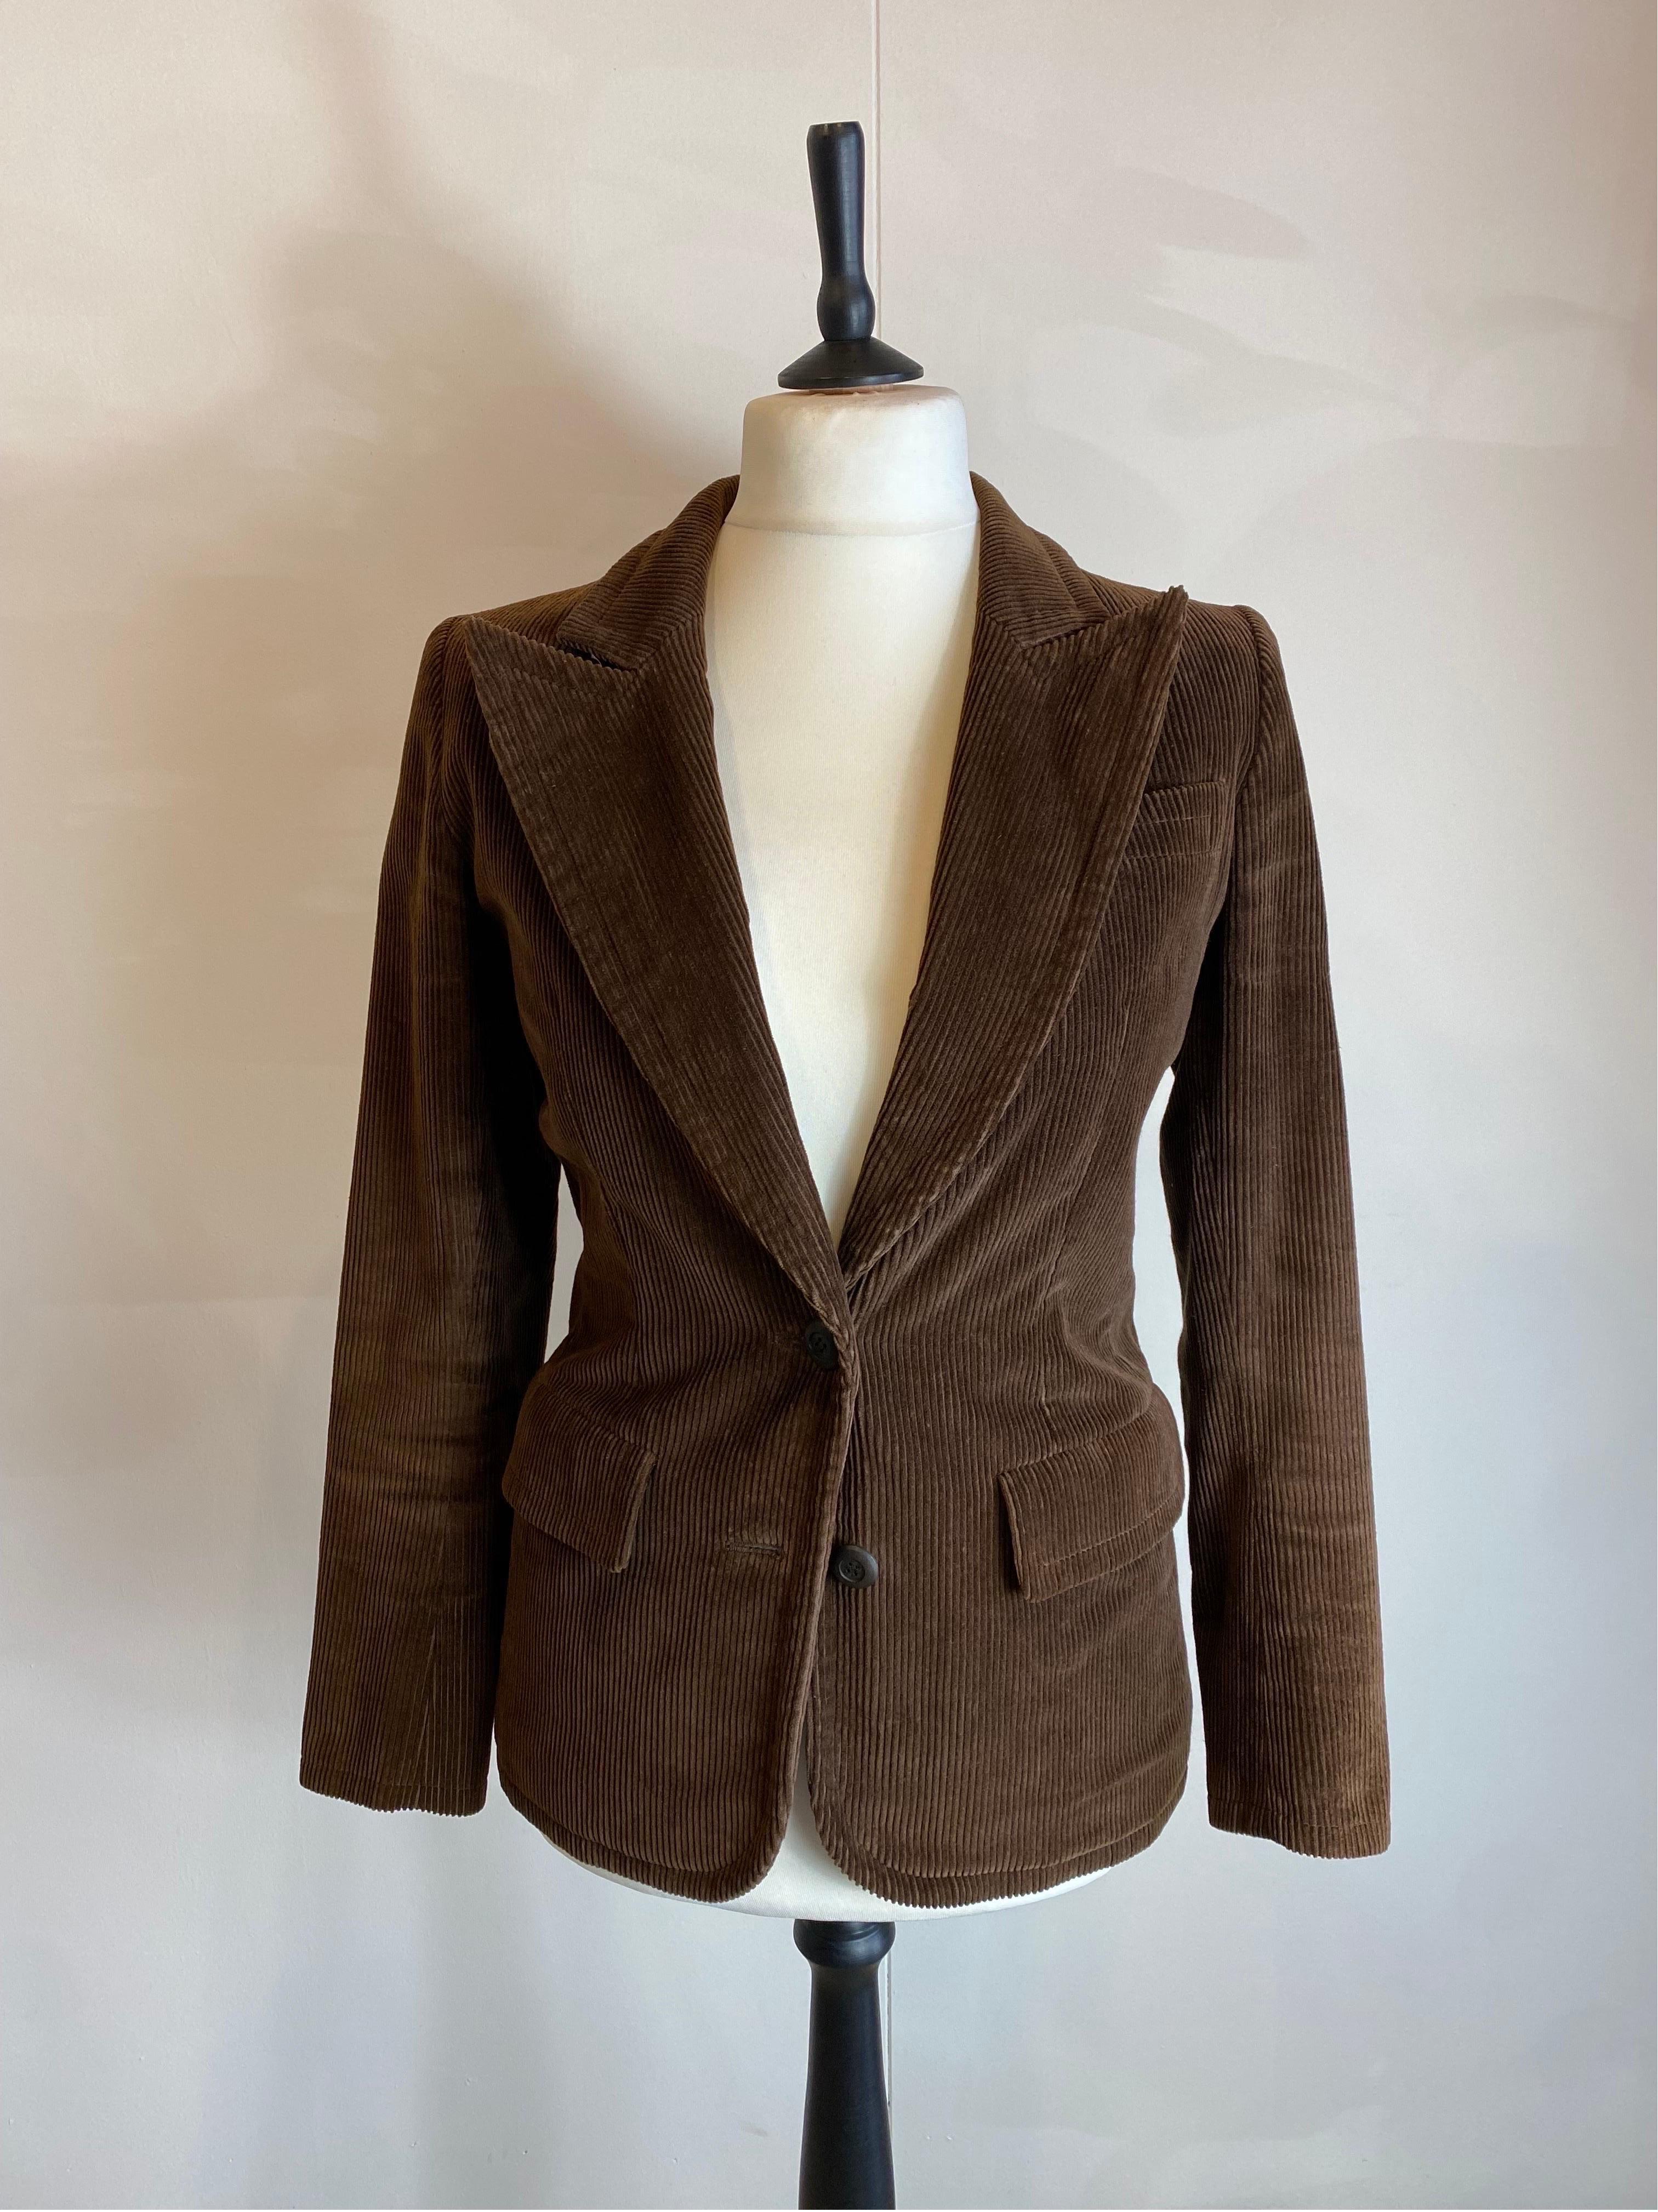 Yves Saint Laurent jacket.
Vintage 90s.
In brown ribs. 100% cotton.
French size 38 which corresponds to an Italian 42.
Shoulders 42 cm
Bust 45 cm
Waist 40cm
Length 73 cm
Second hand item but in excellent general condition, with signs of normal use